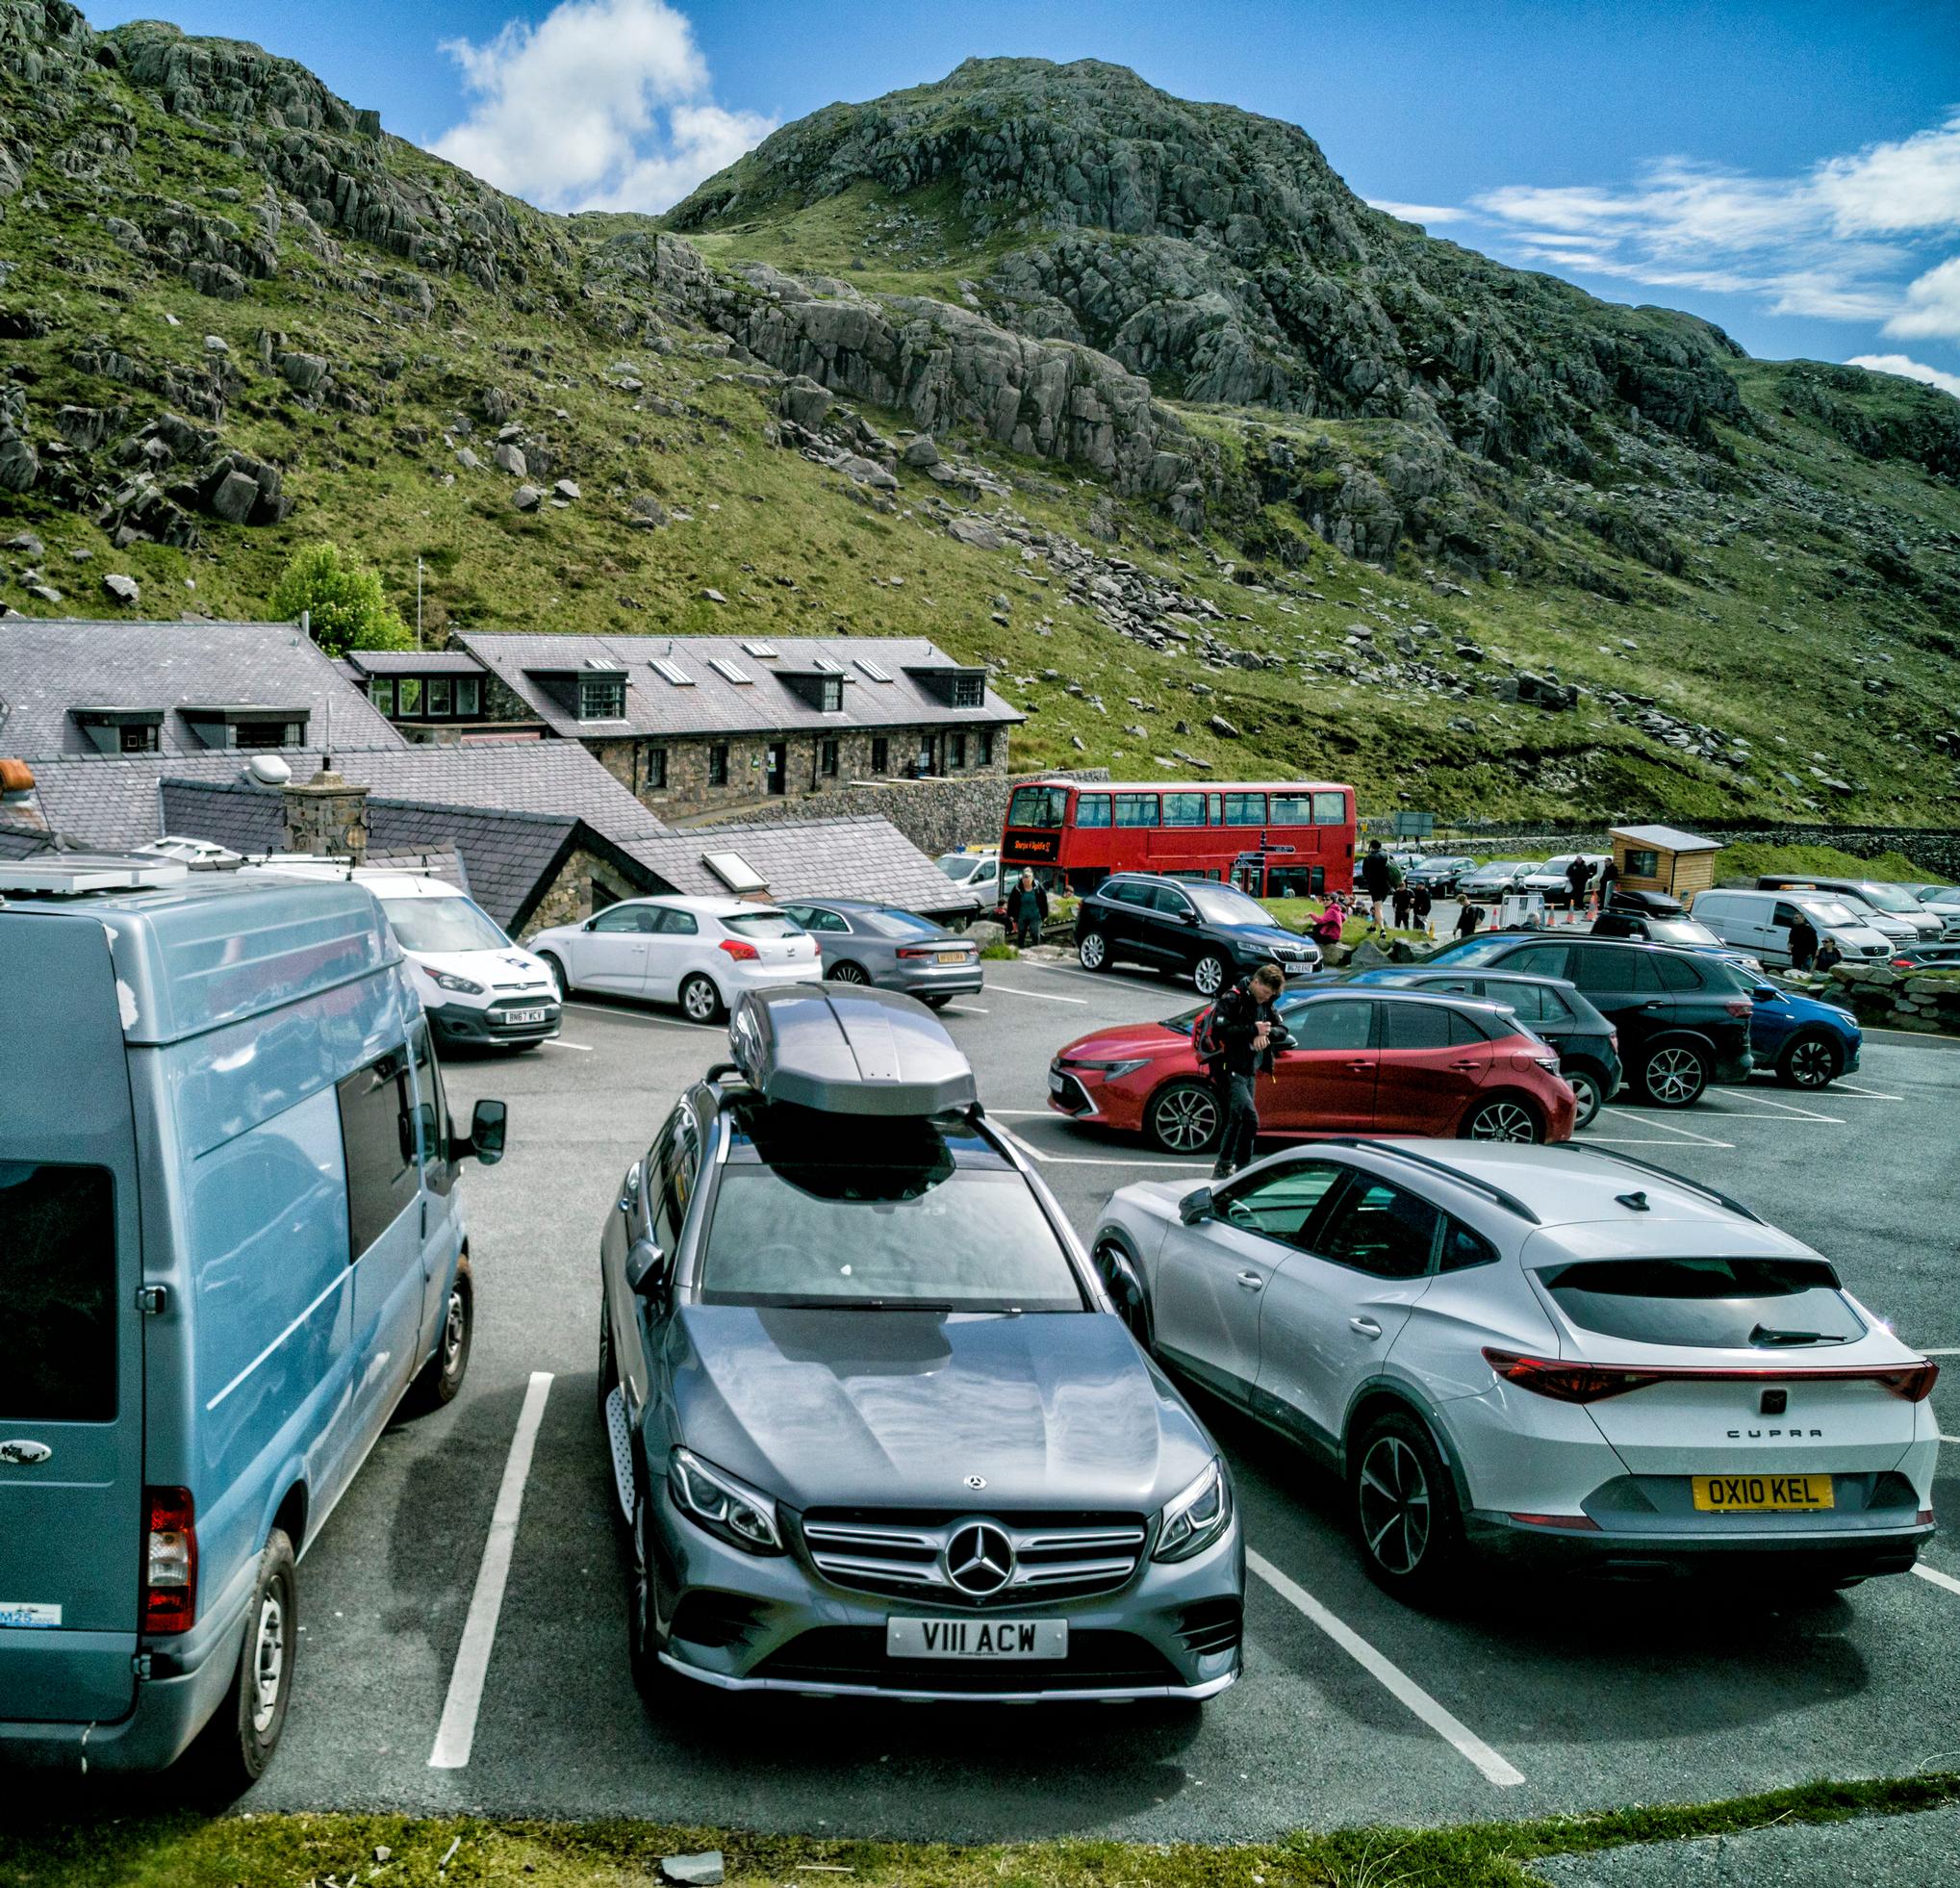 Revenue from parking in Snowdonia supports bus services